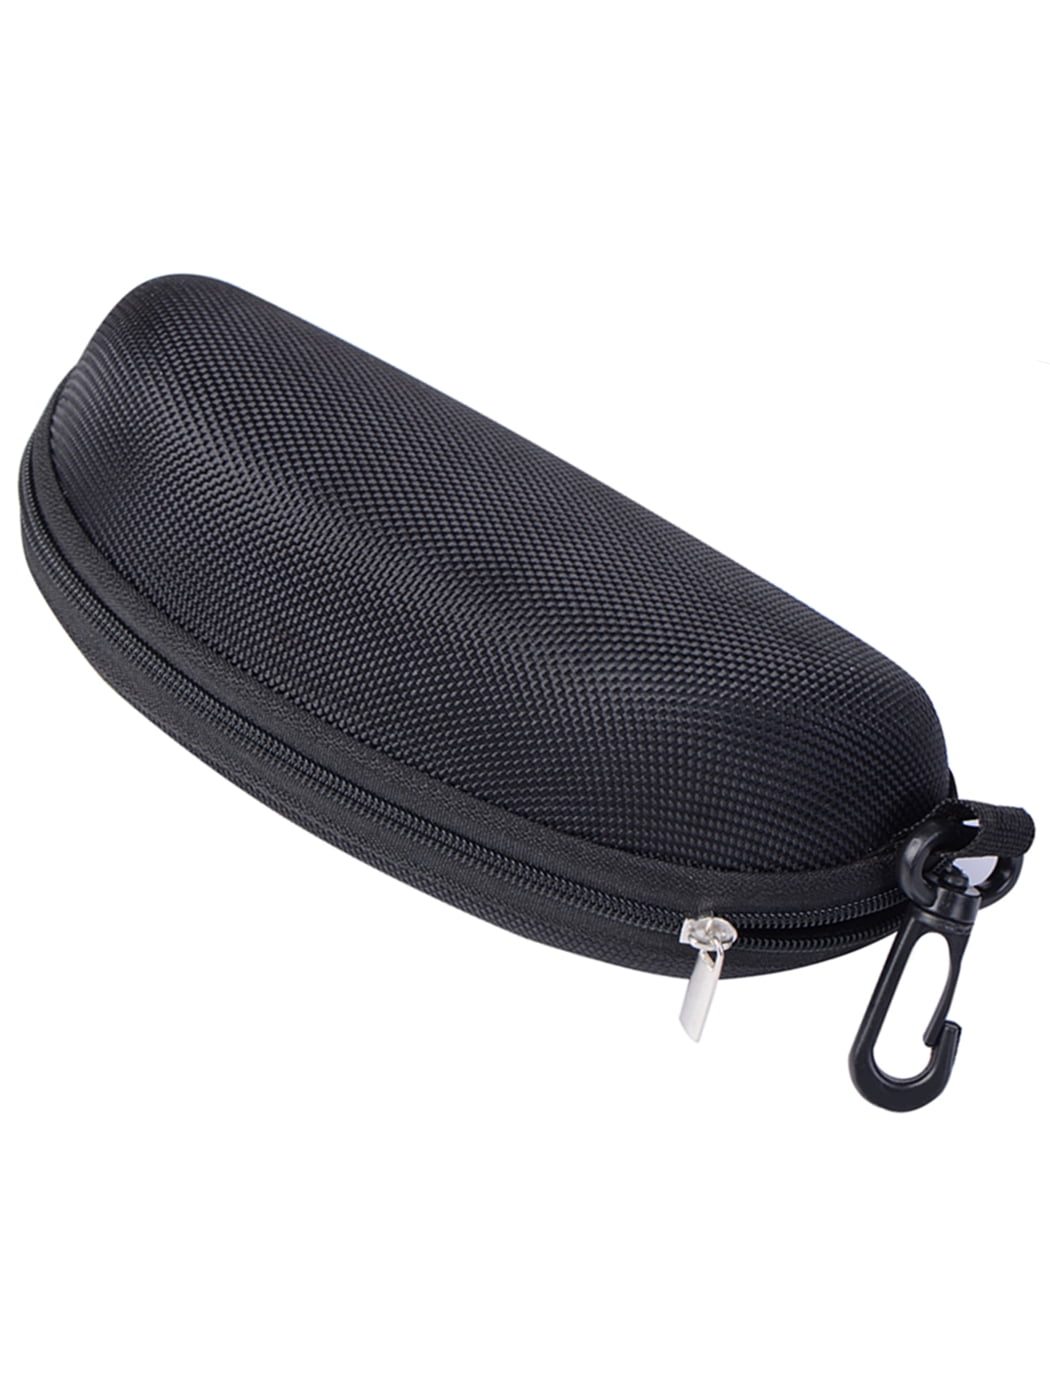 AED9 New Zipper Sunglasses Eyeglass Case Box Travel Outdoor Protector Holder 